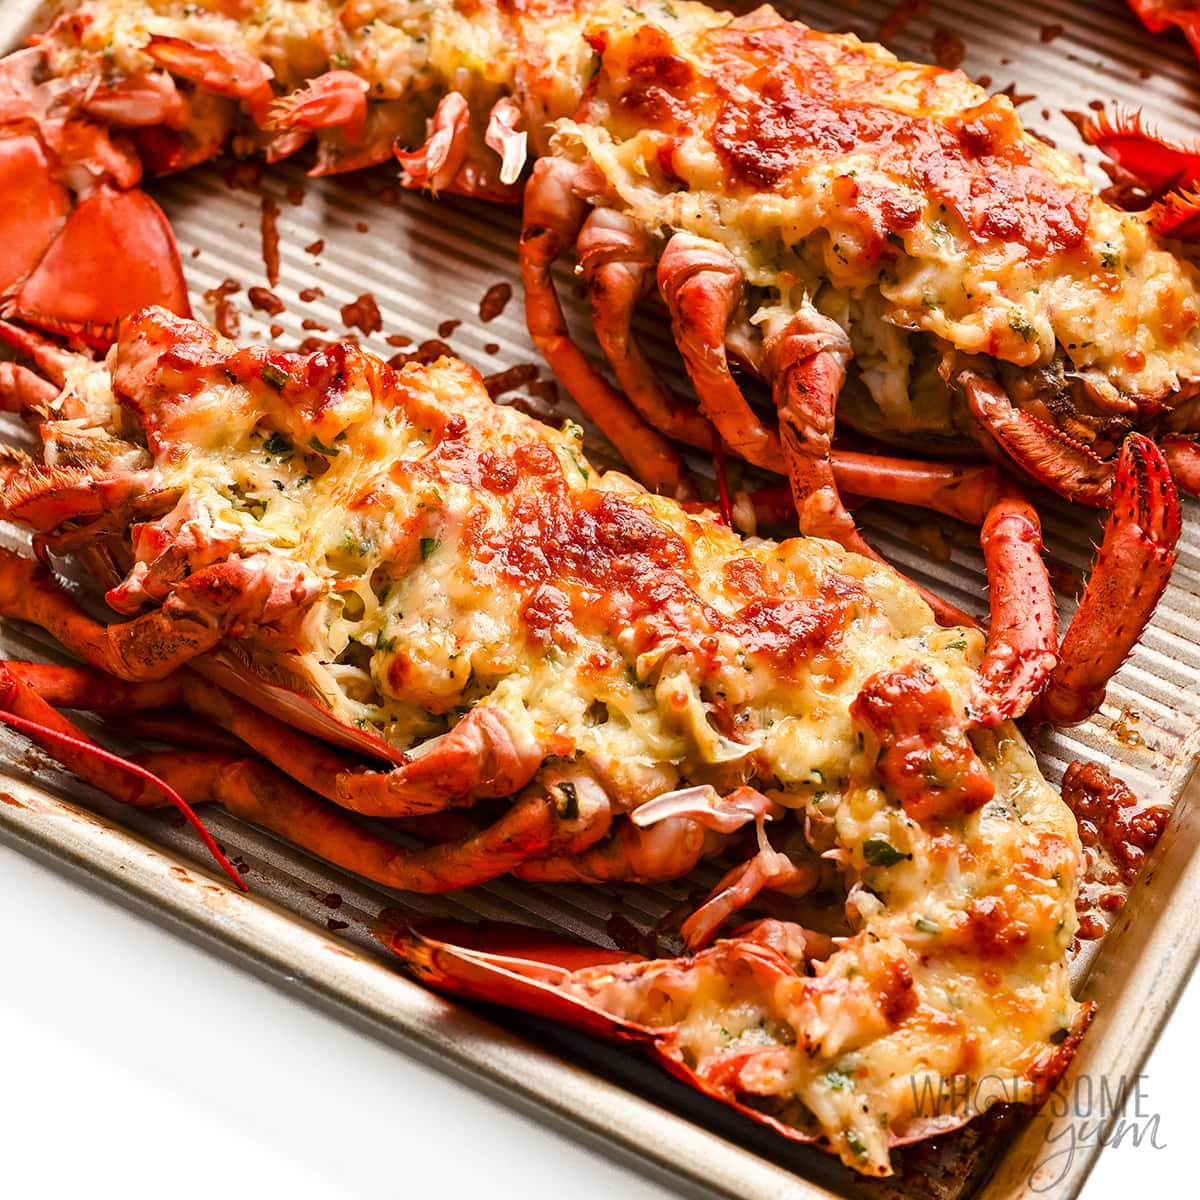 Place the Lobster Thermidor on the pan and grill.